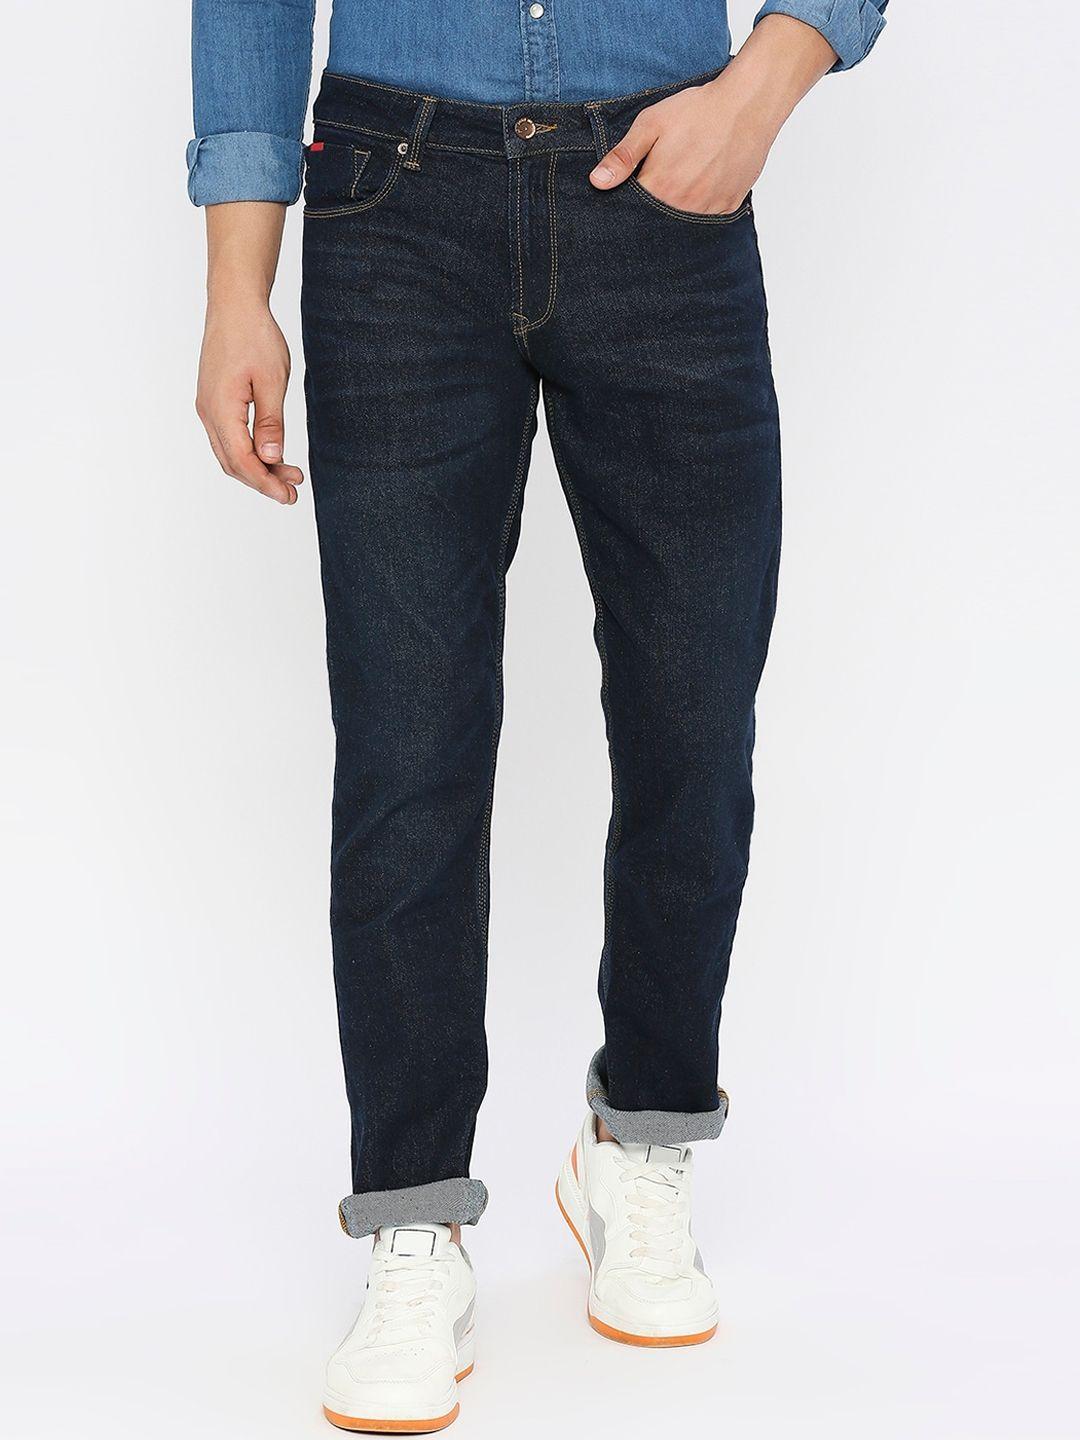 spykar-men-relaxed-fit-light-fade-stretchable-clean-look-jeans